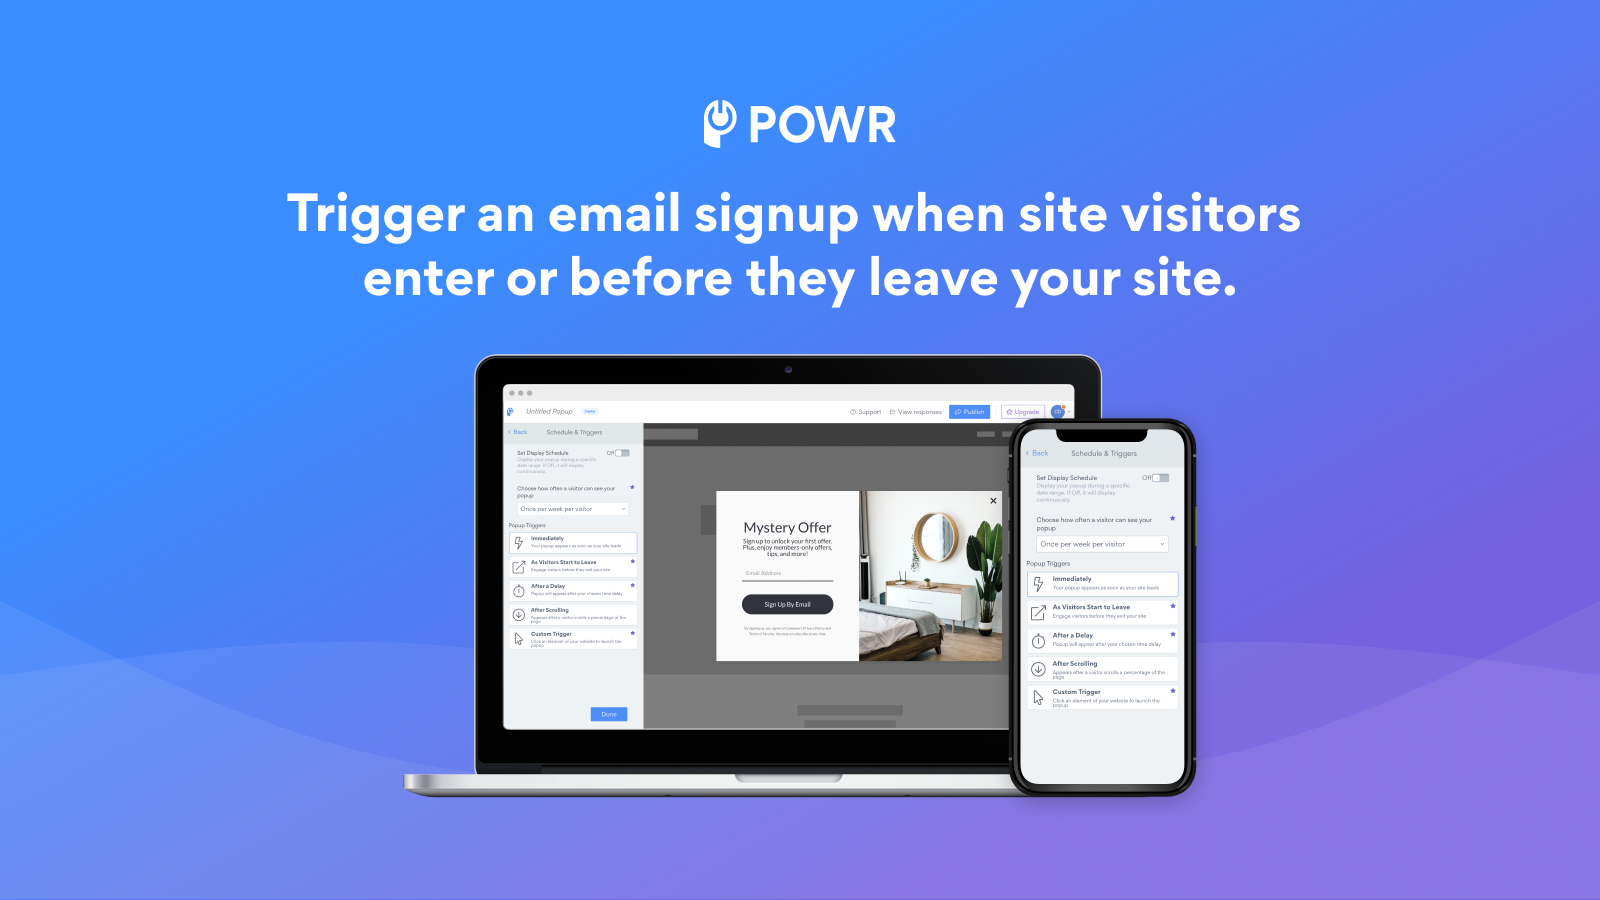 Trigger an email signup upon entry or exit